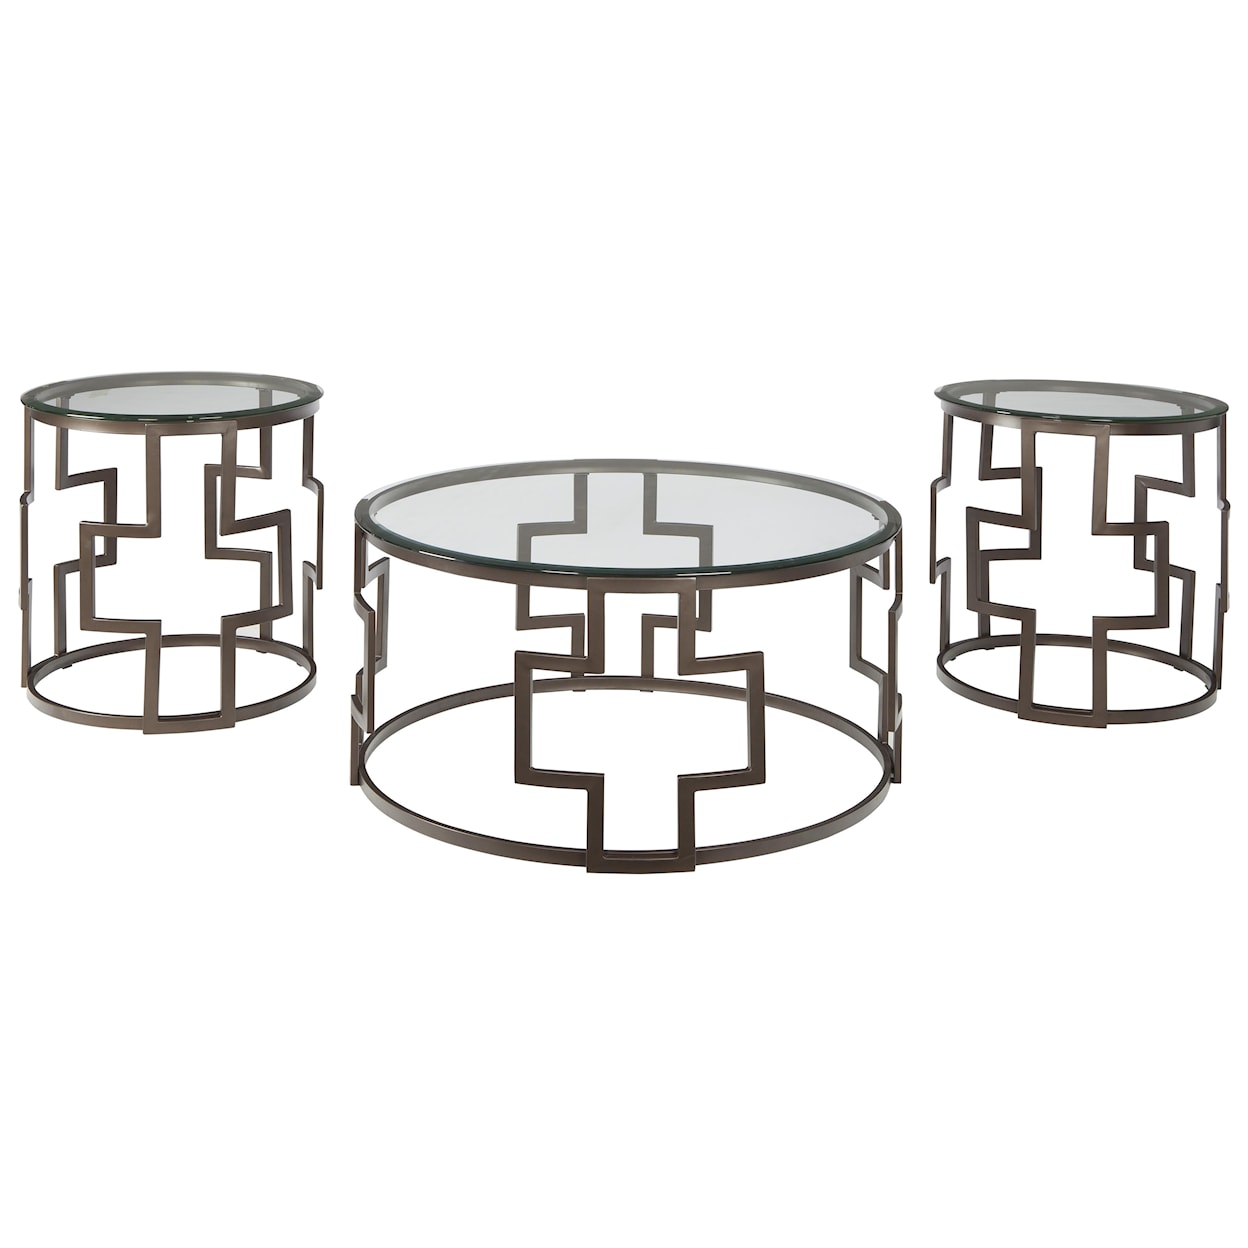 Belfort Select Frostine Occasional Table Set